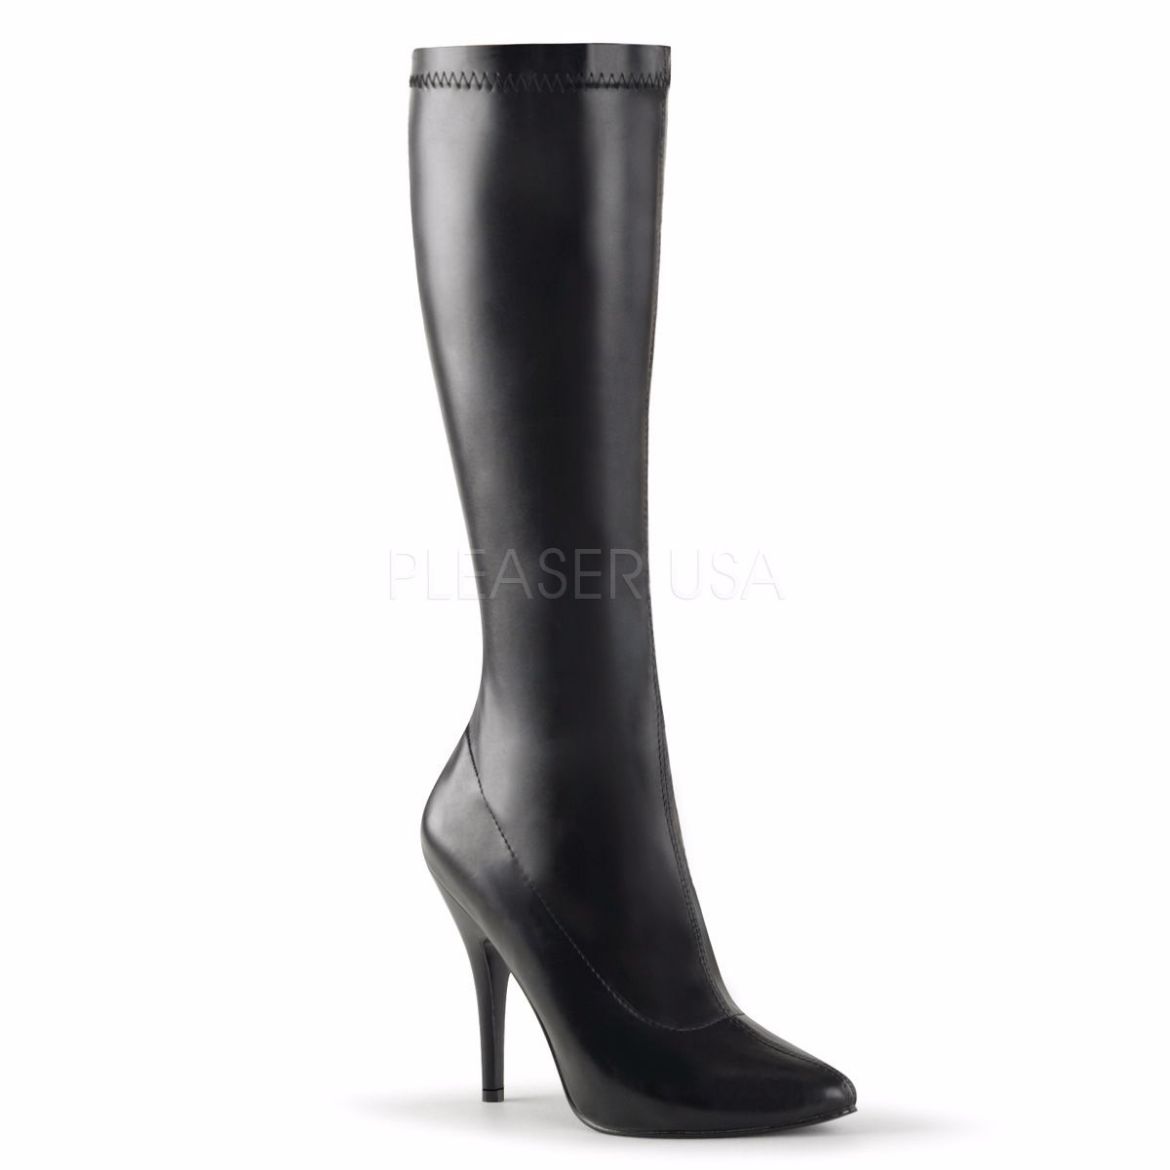 Product image of Pleaser Seduce-2000 Black Stretch Faux Leather, 5 inch (12.7 cm) Heel Knee High Boot